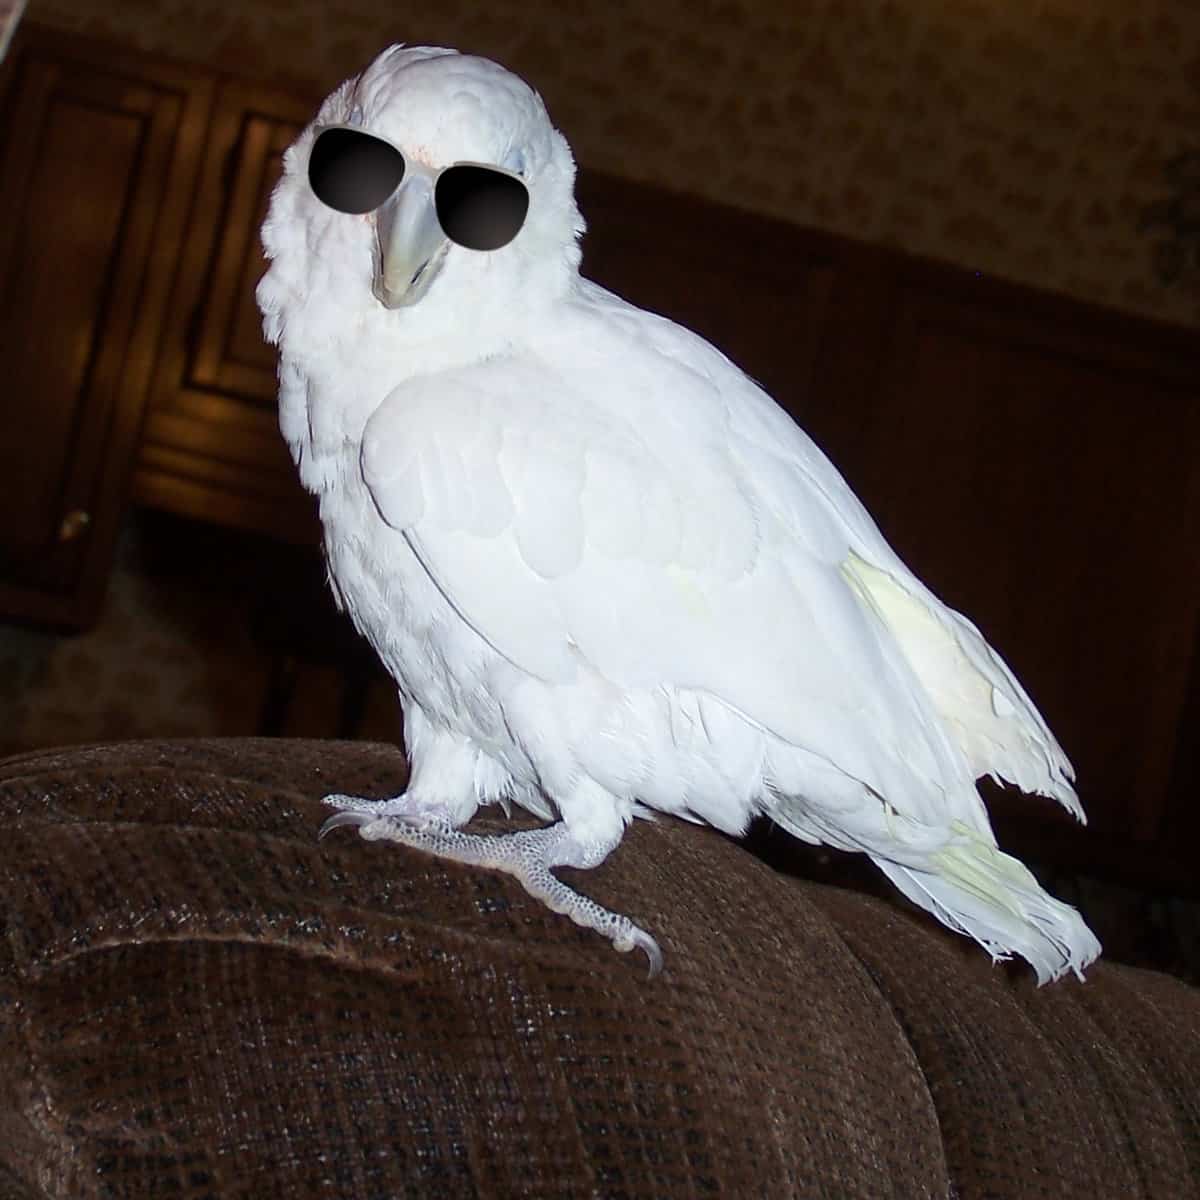 My Blind Cockatoo Has No Lighting How Can He Produce Vit D?